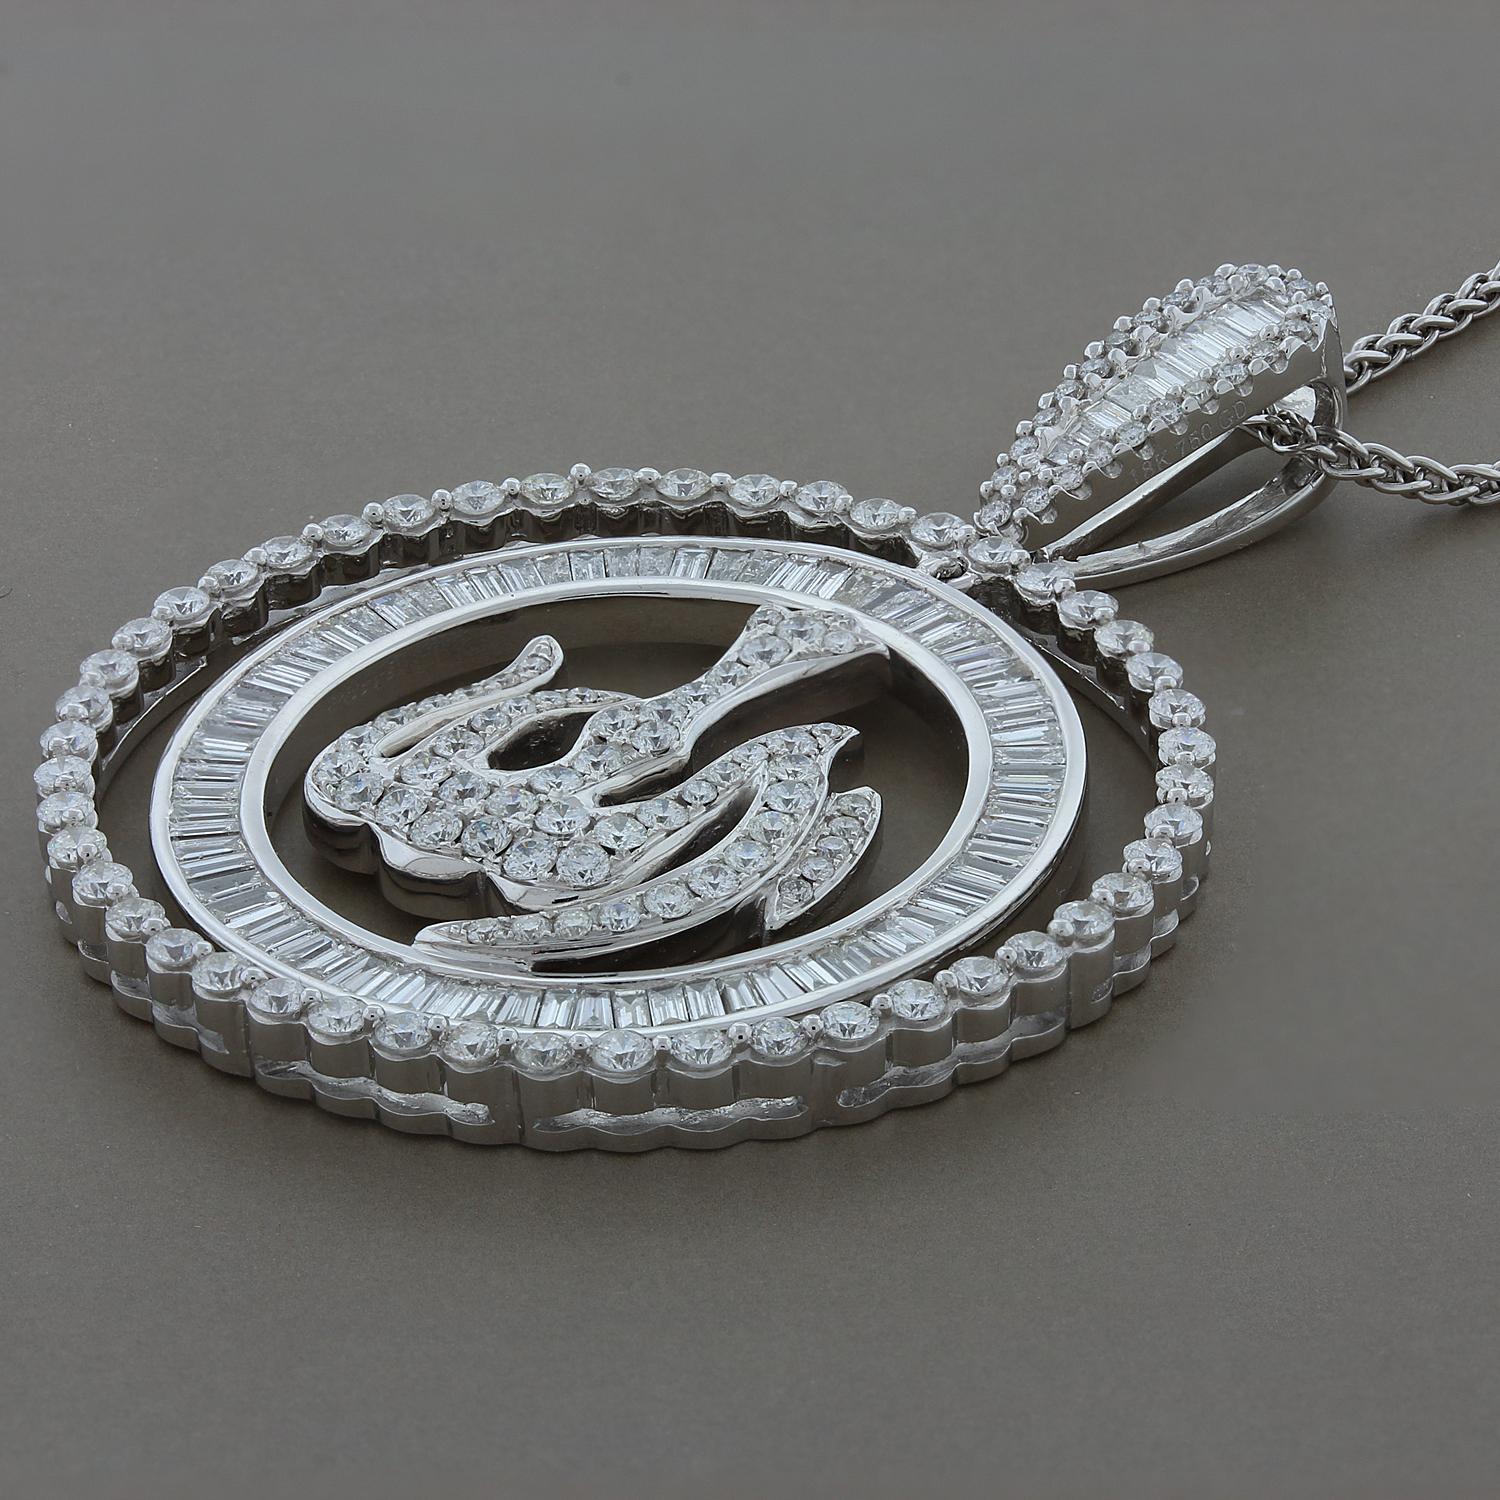 An “Allah” pendant in the center of two halos set in 18K white gold. The outer halo features round cut diamonds in a prong setting, and the inner halo features baguette cut diamonds in a channel setting. Total diamond weight is 4.78 carats.

Pendant